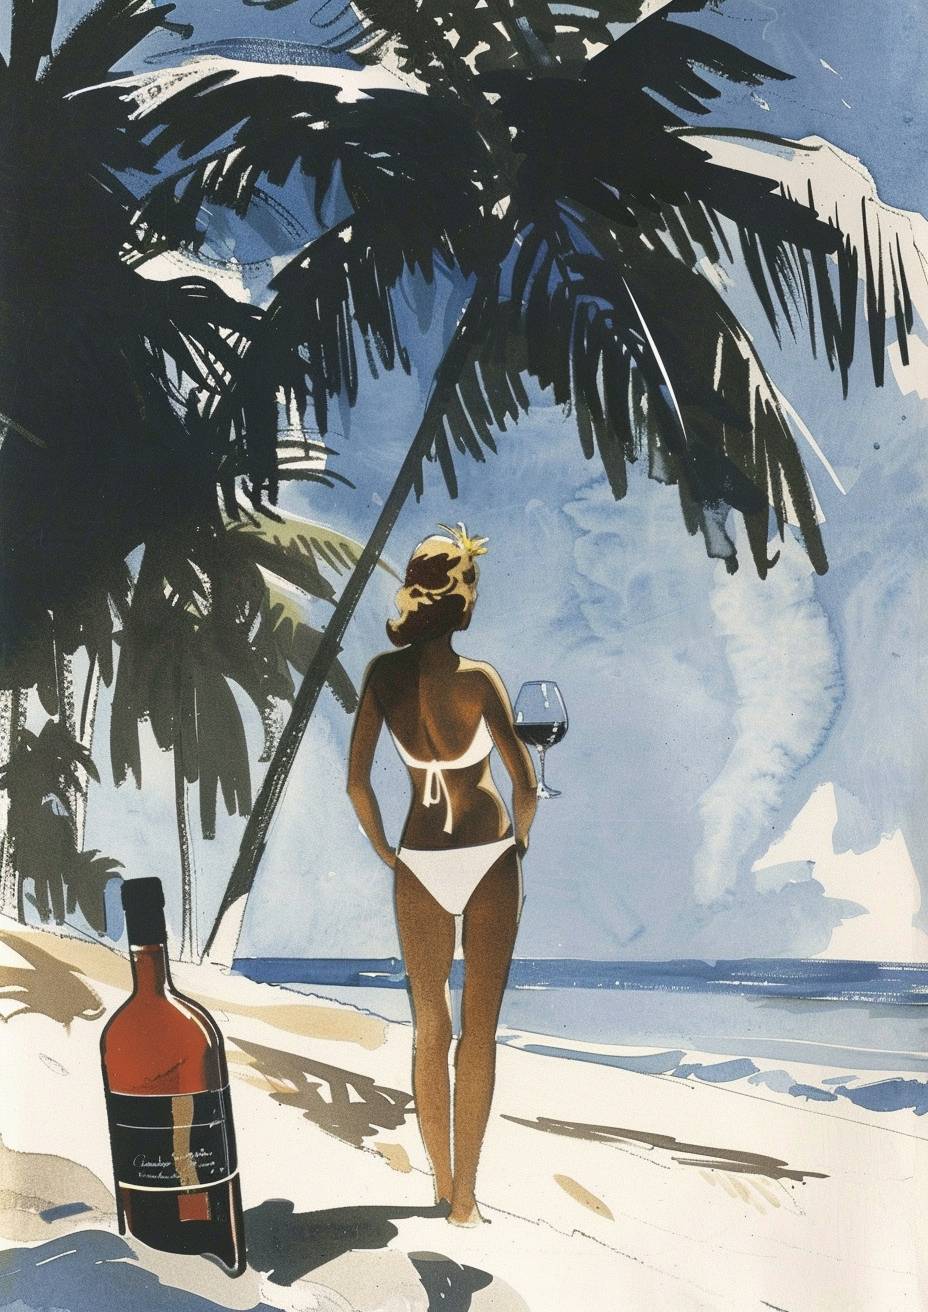 A bottle containing a tropical beach with a beautiful swimsuit model, in the style of digitally manipulated images